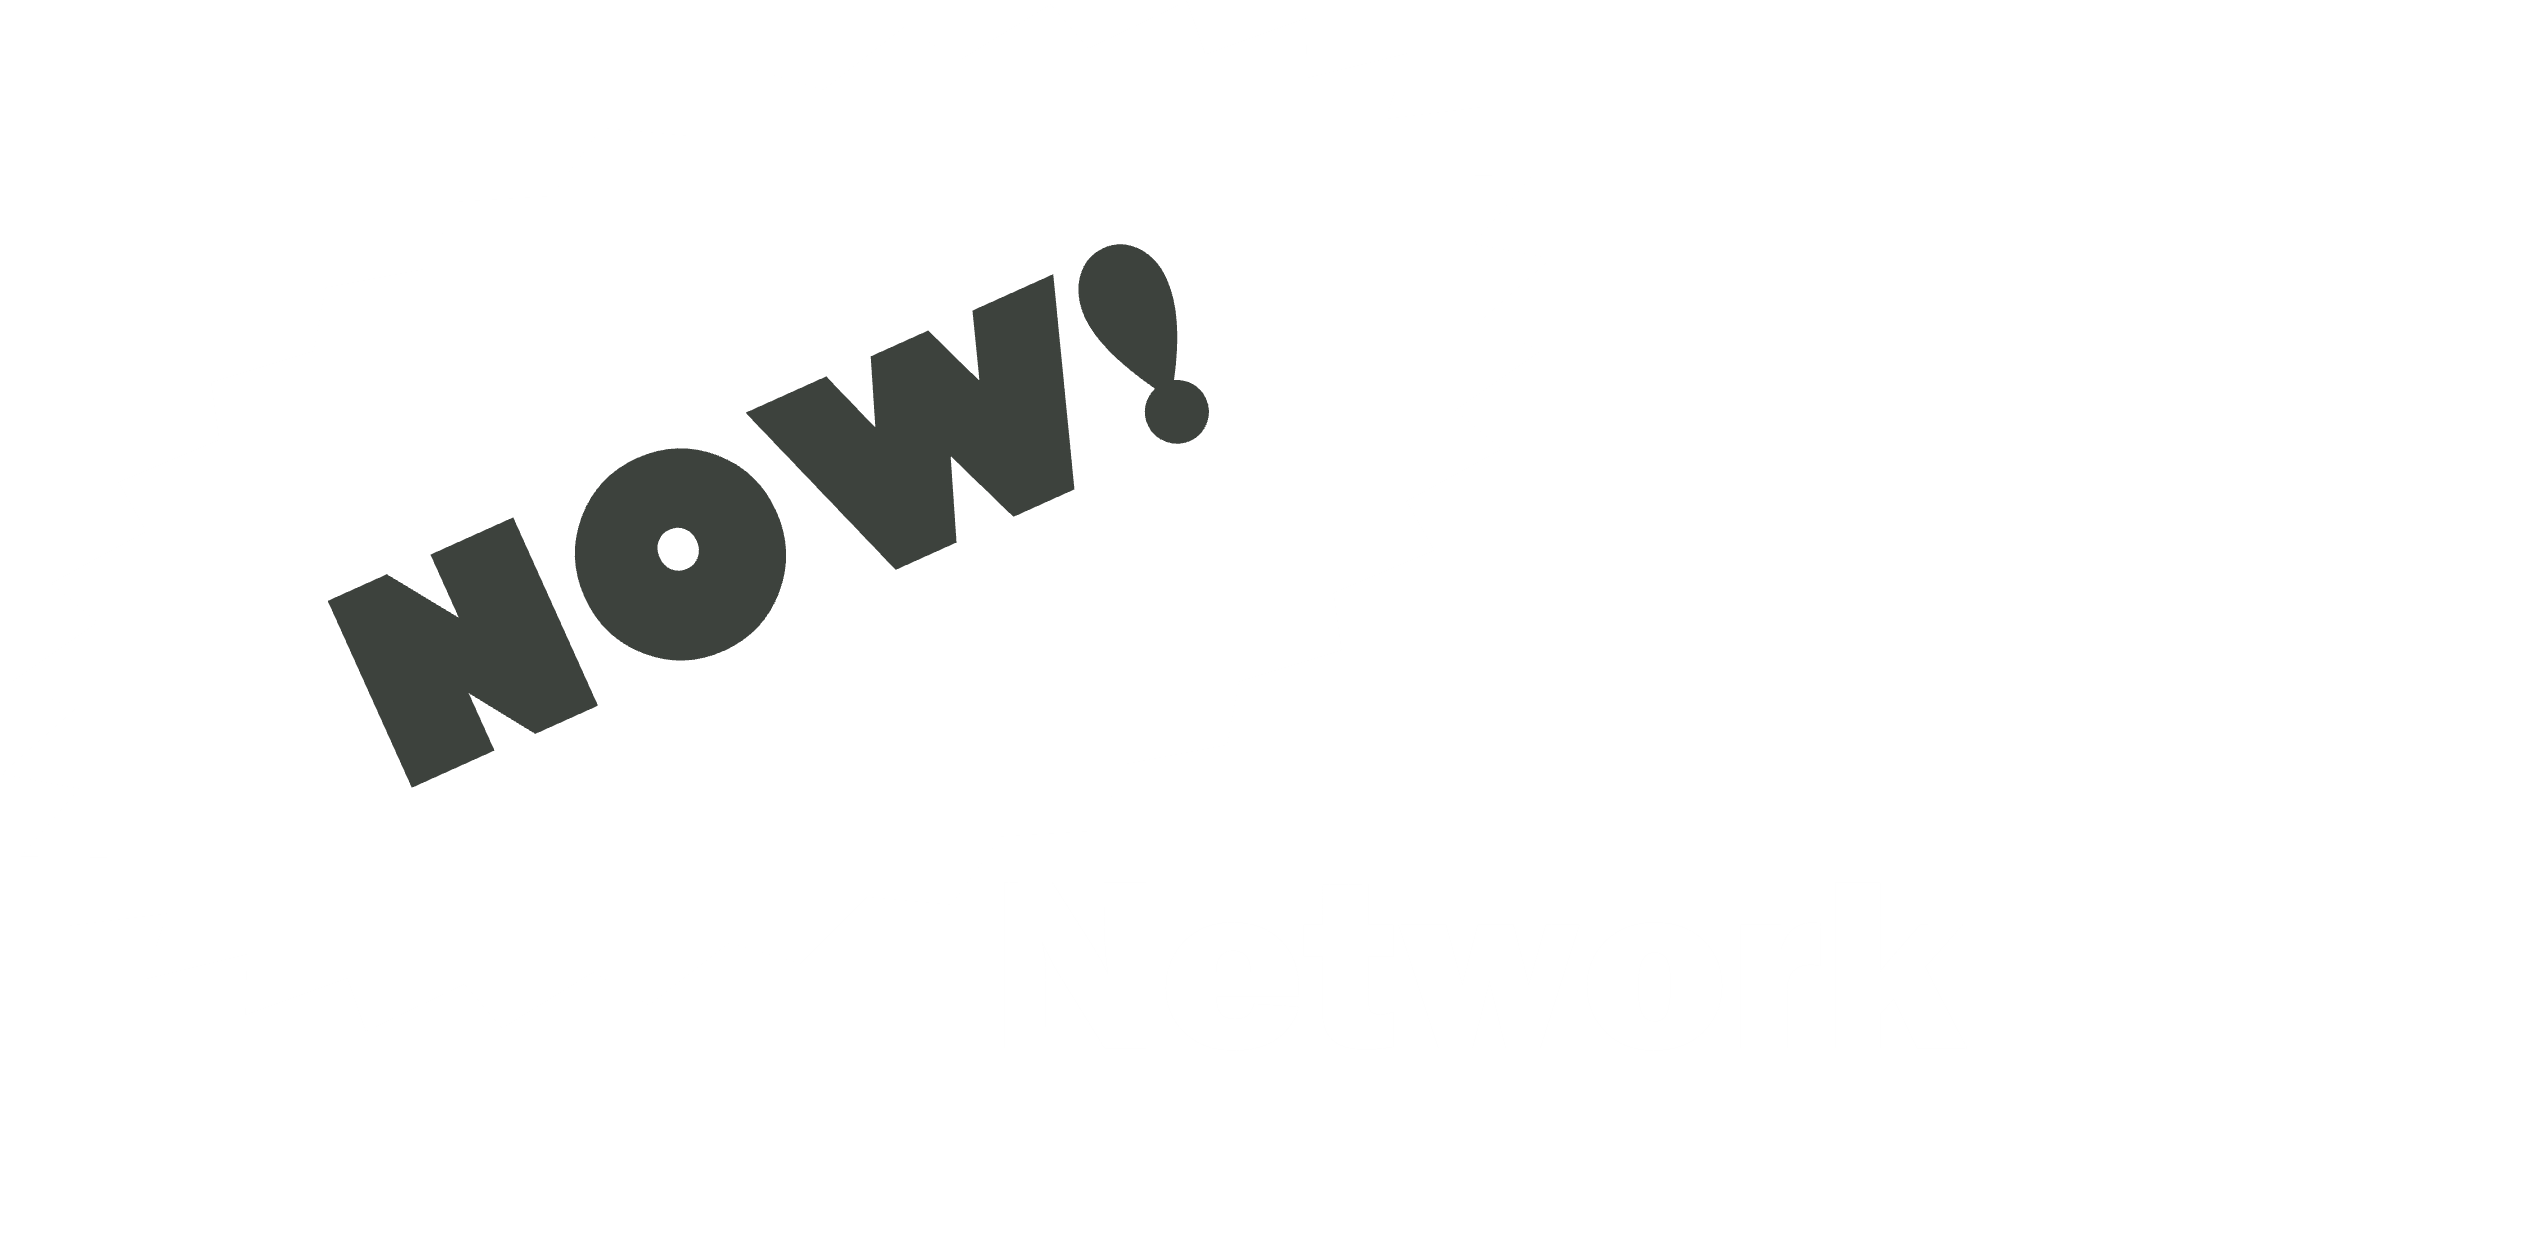 NOW! Network